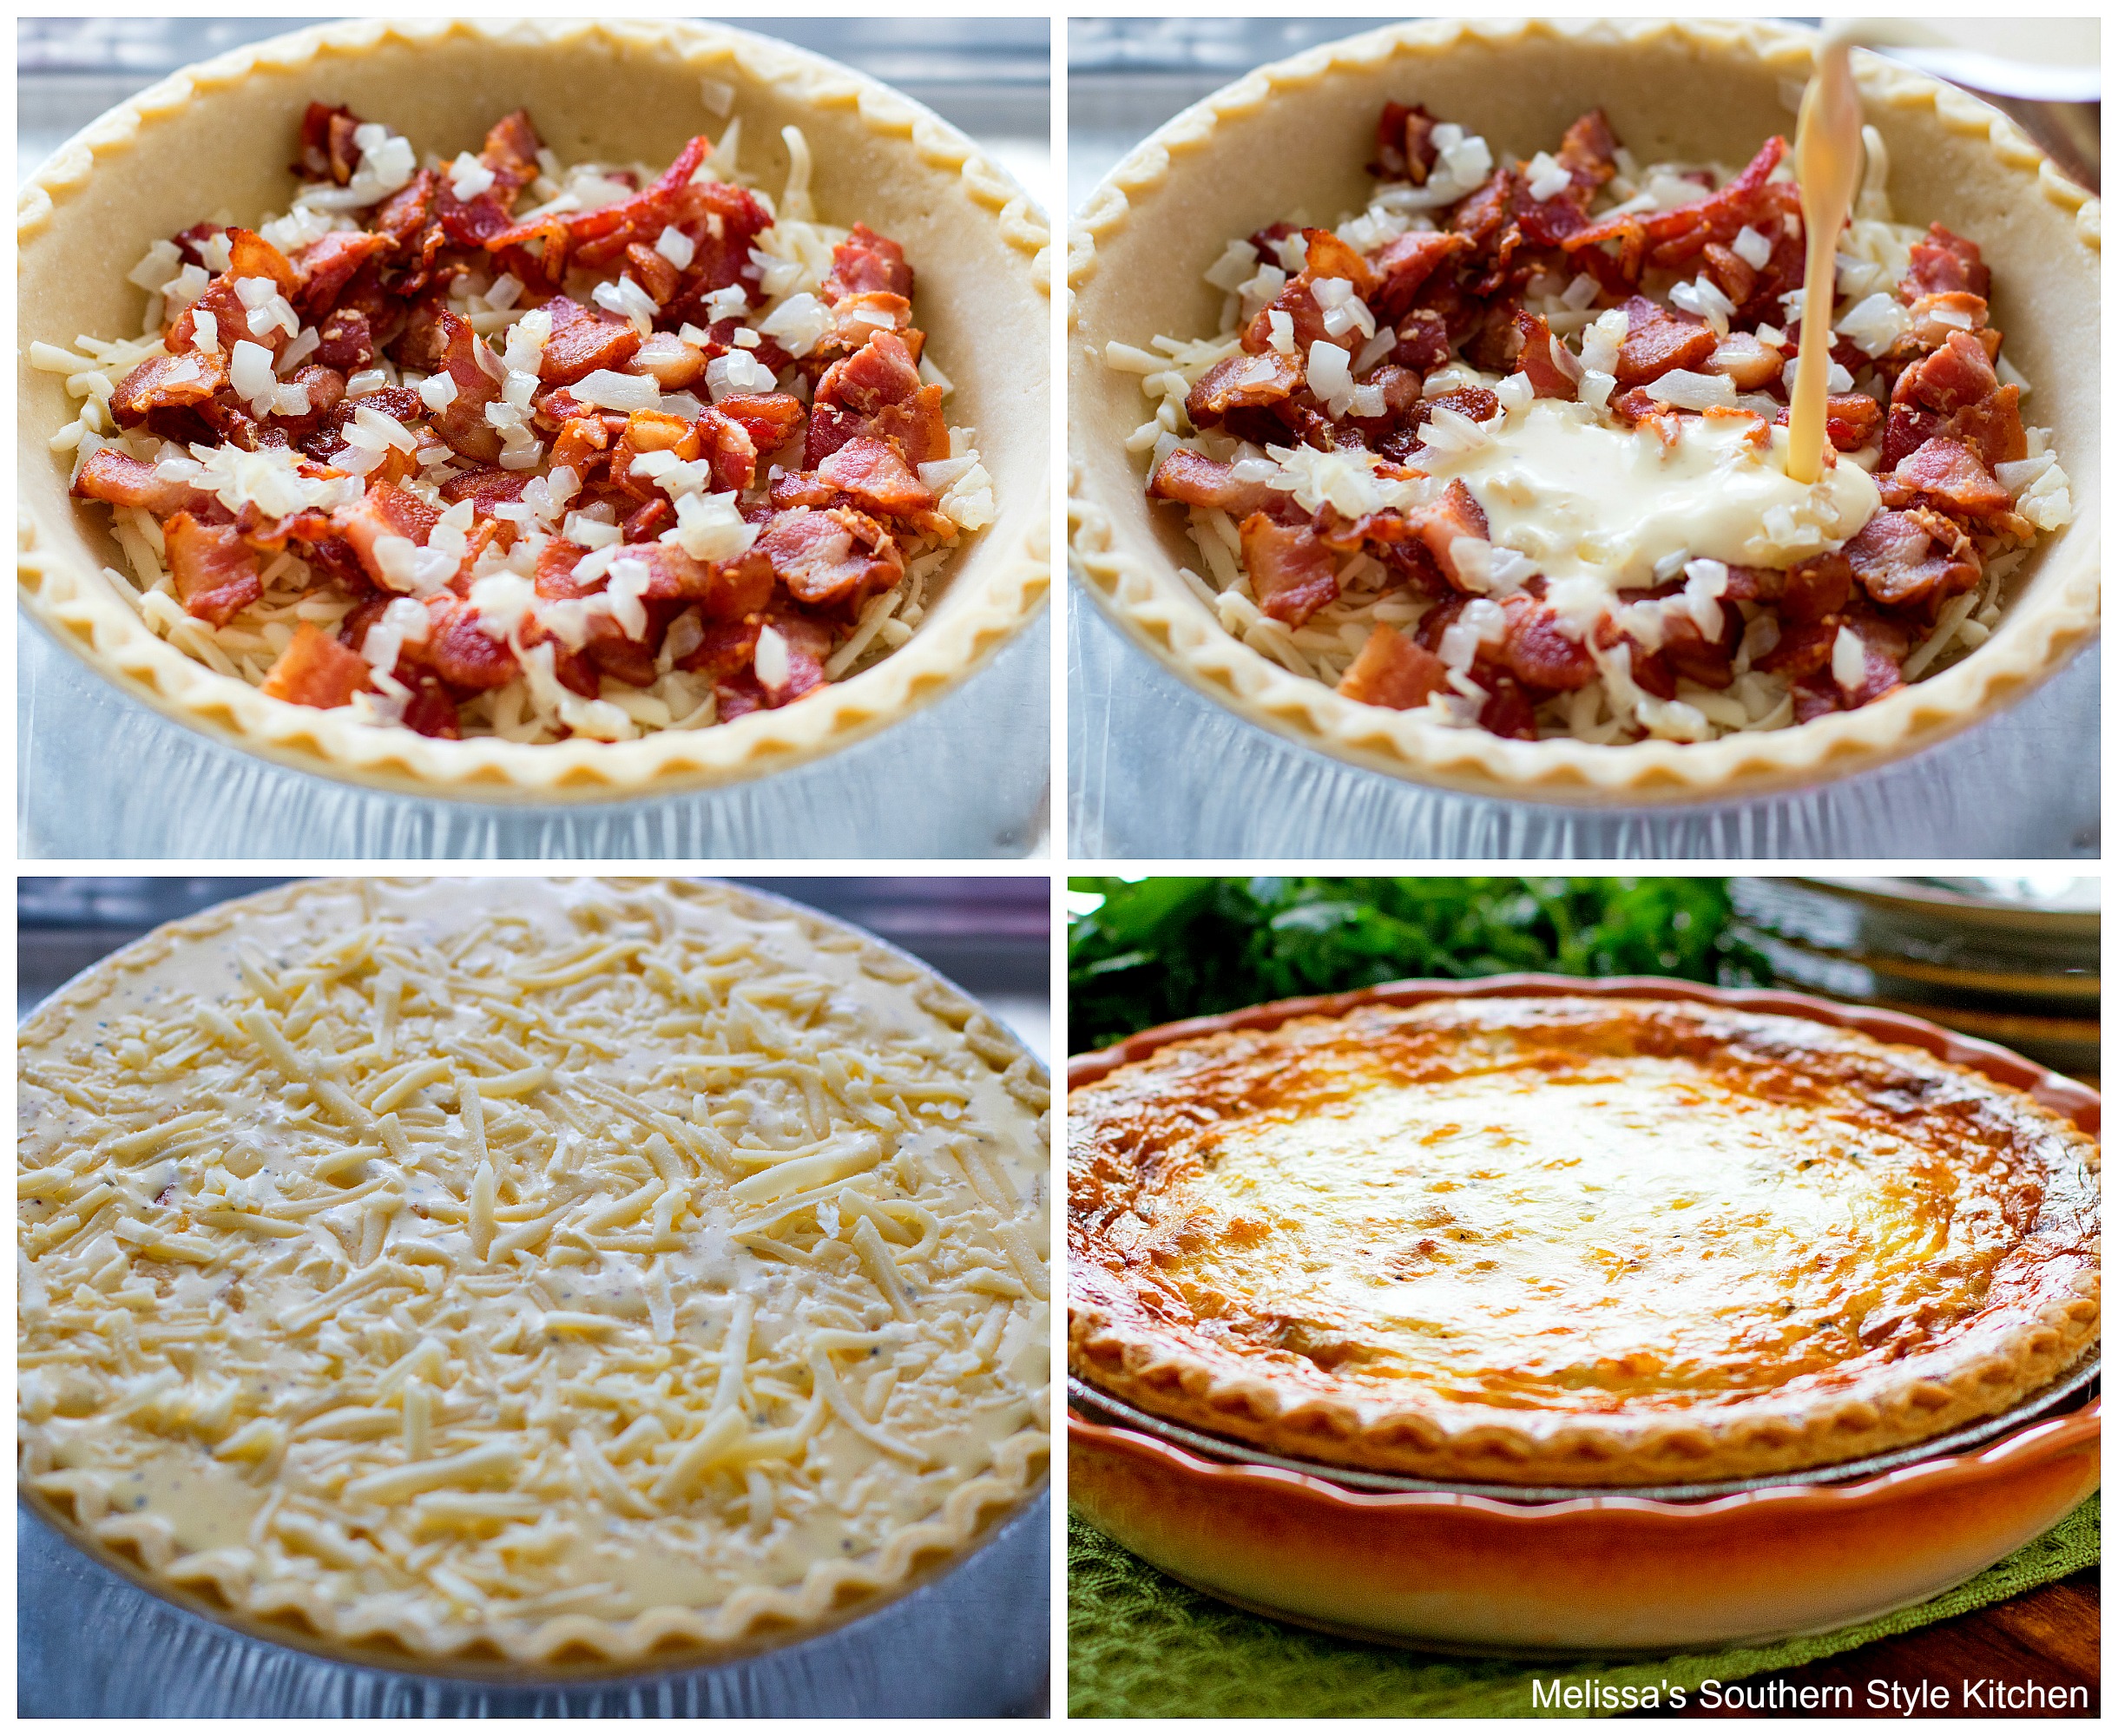 step-by-step images demonstrating quiche preparation